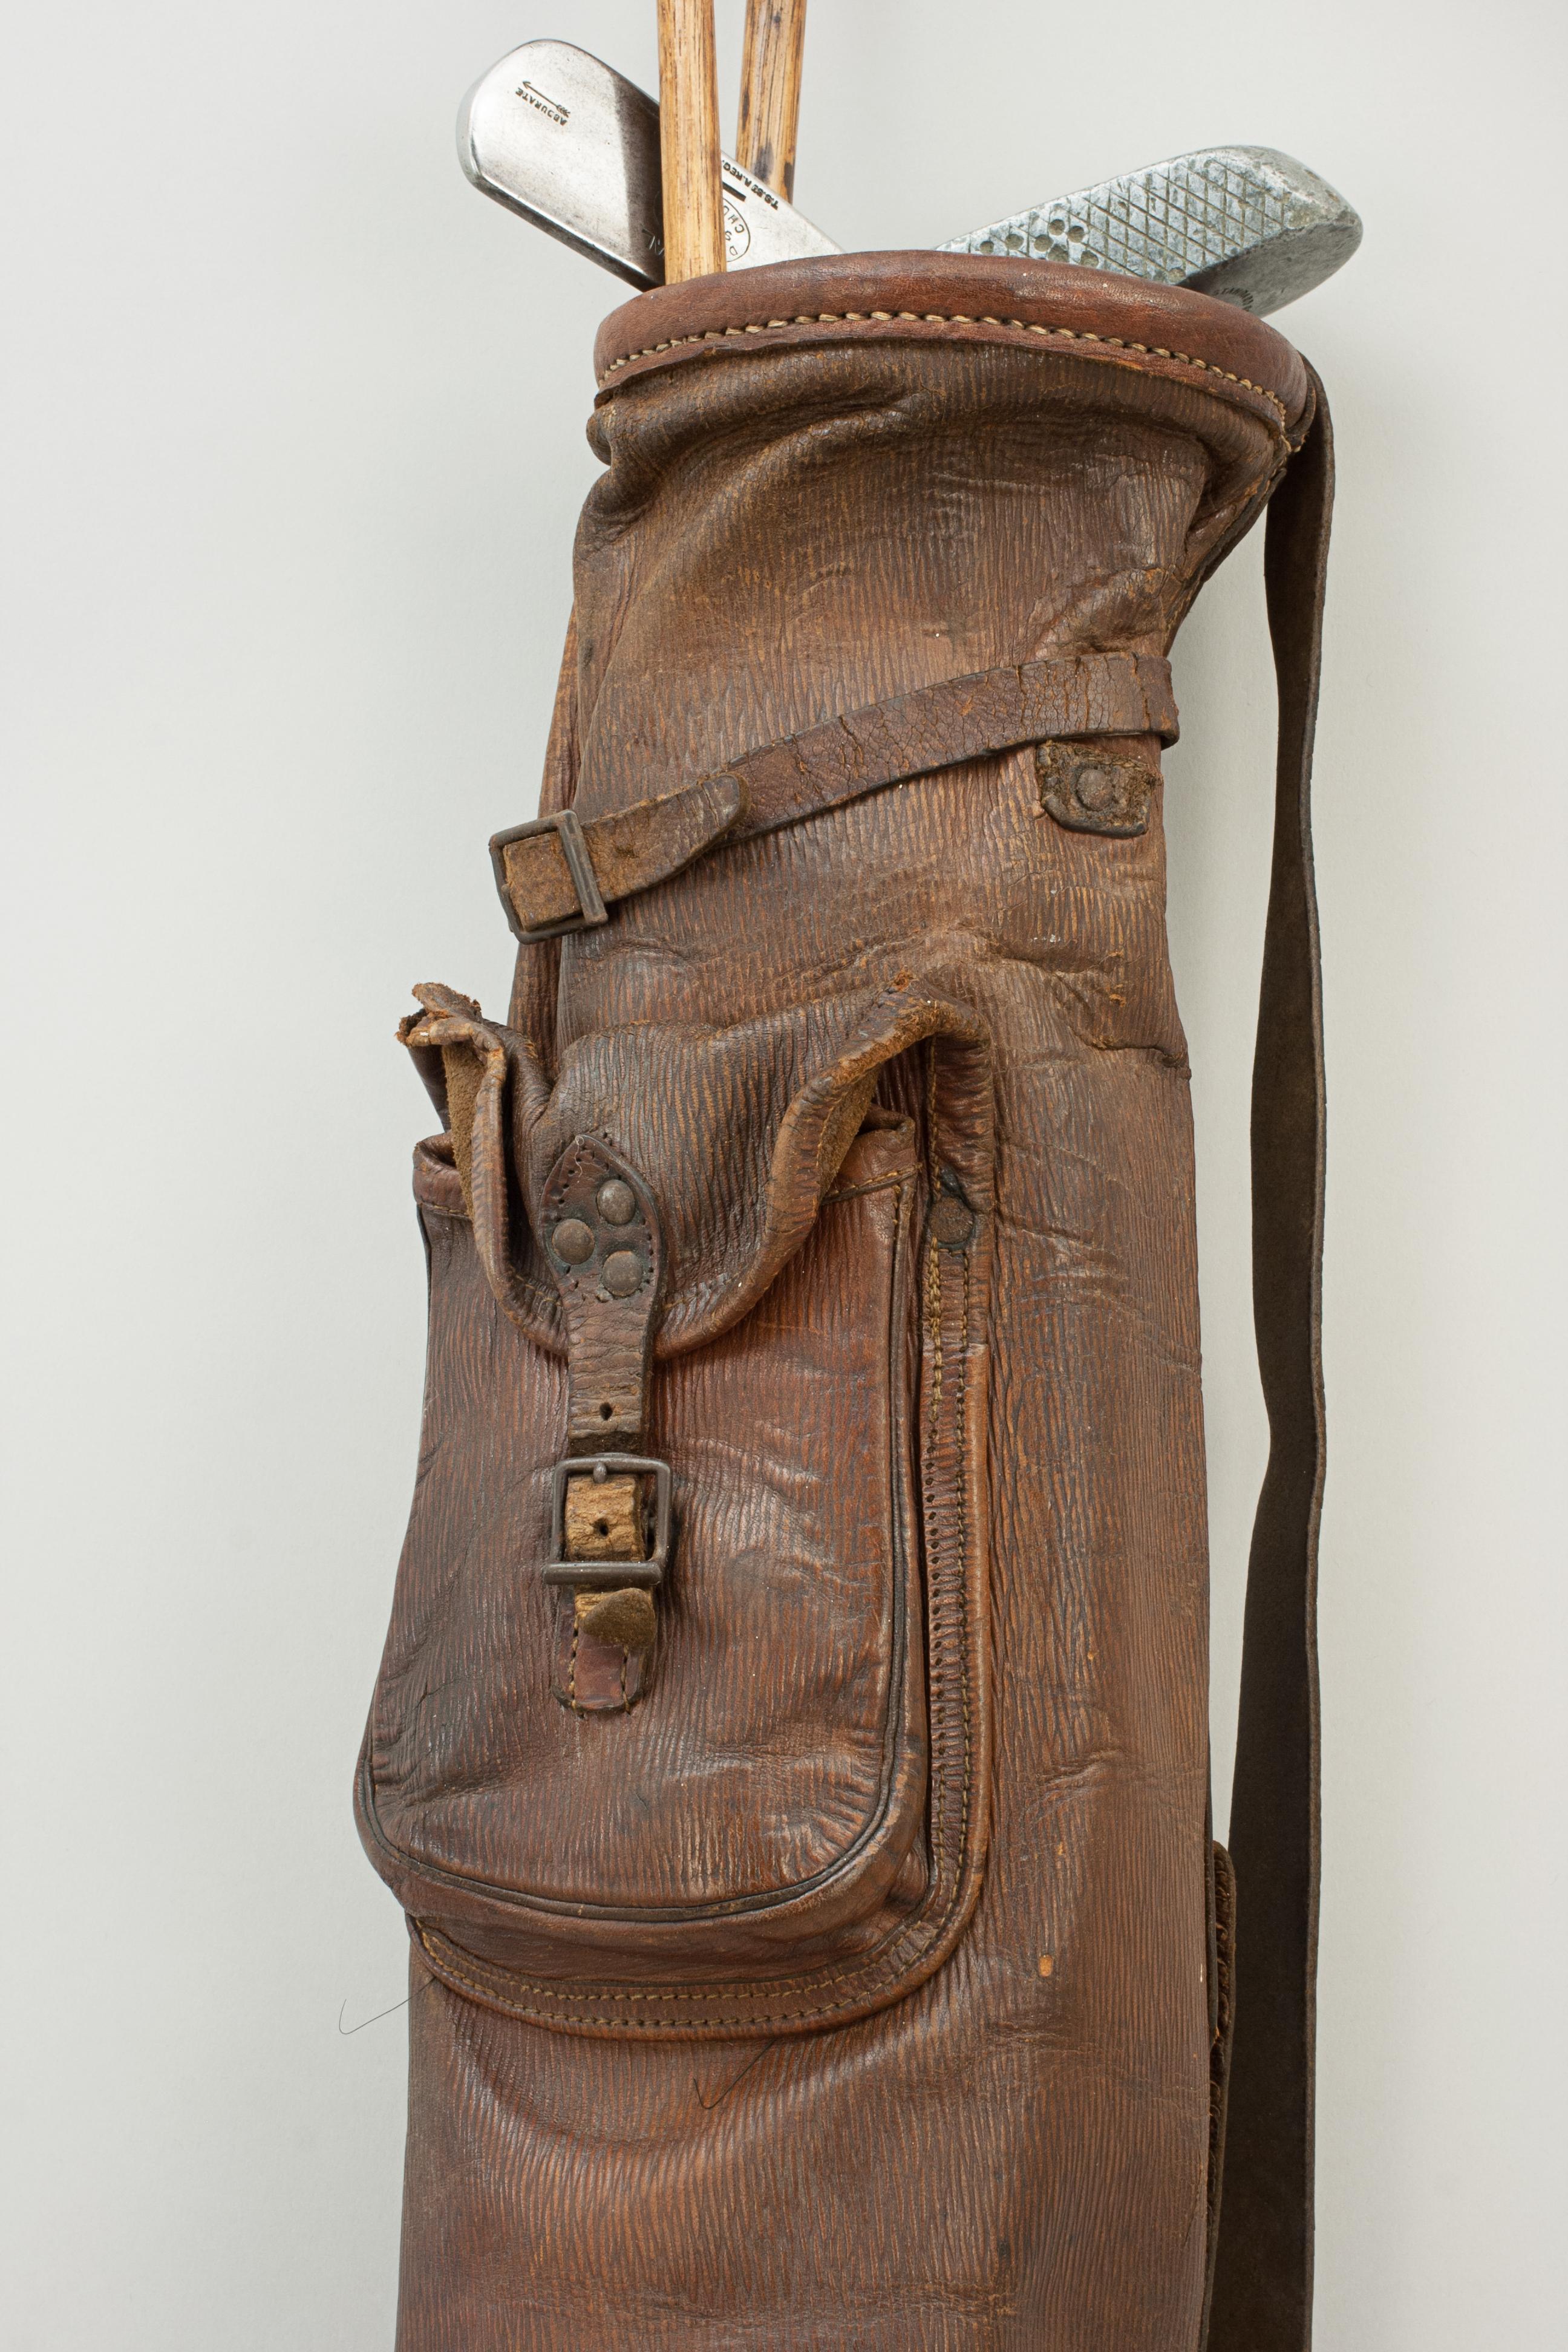 Leather pencil golf bag.
A nice small leather pig skin pencil golf bag with shoulder strap and pocket. The stitching on the bag is fragile so not a usable bag but a great display piece for your hickory golf clubs.

Golf clubs not included, but do